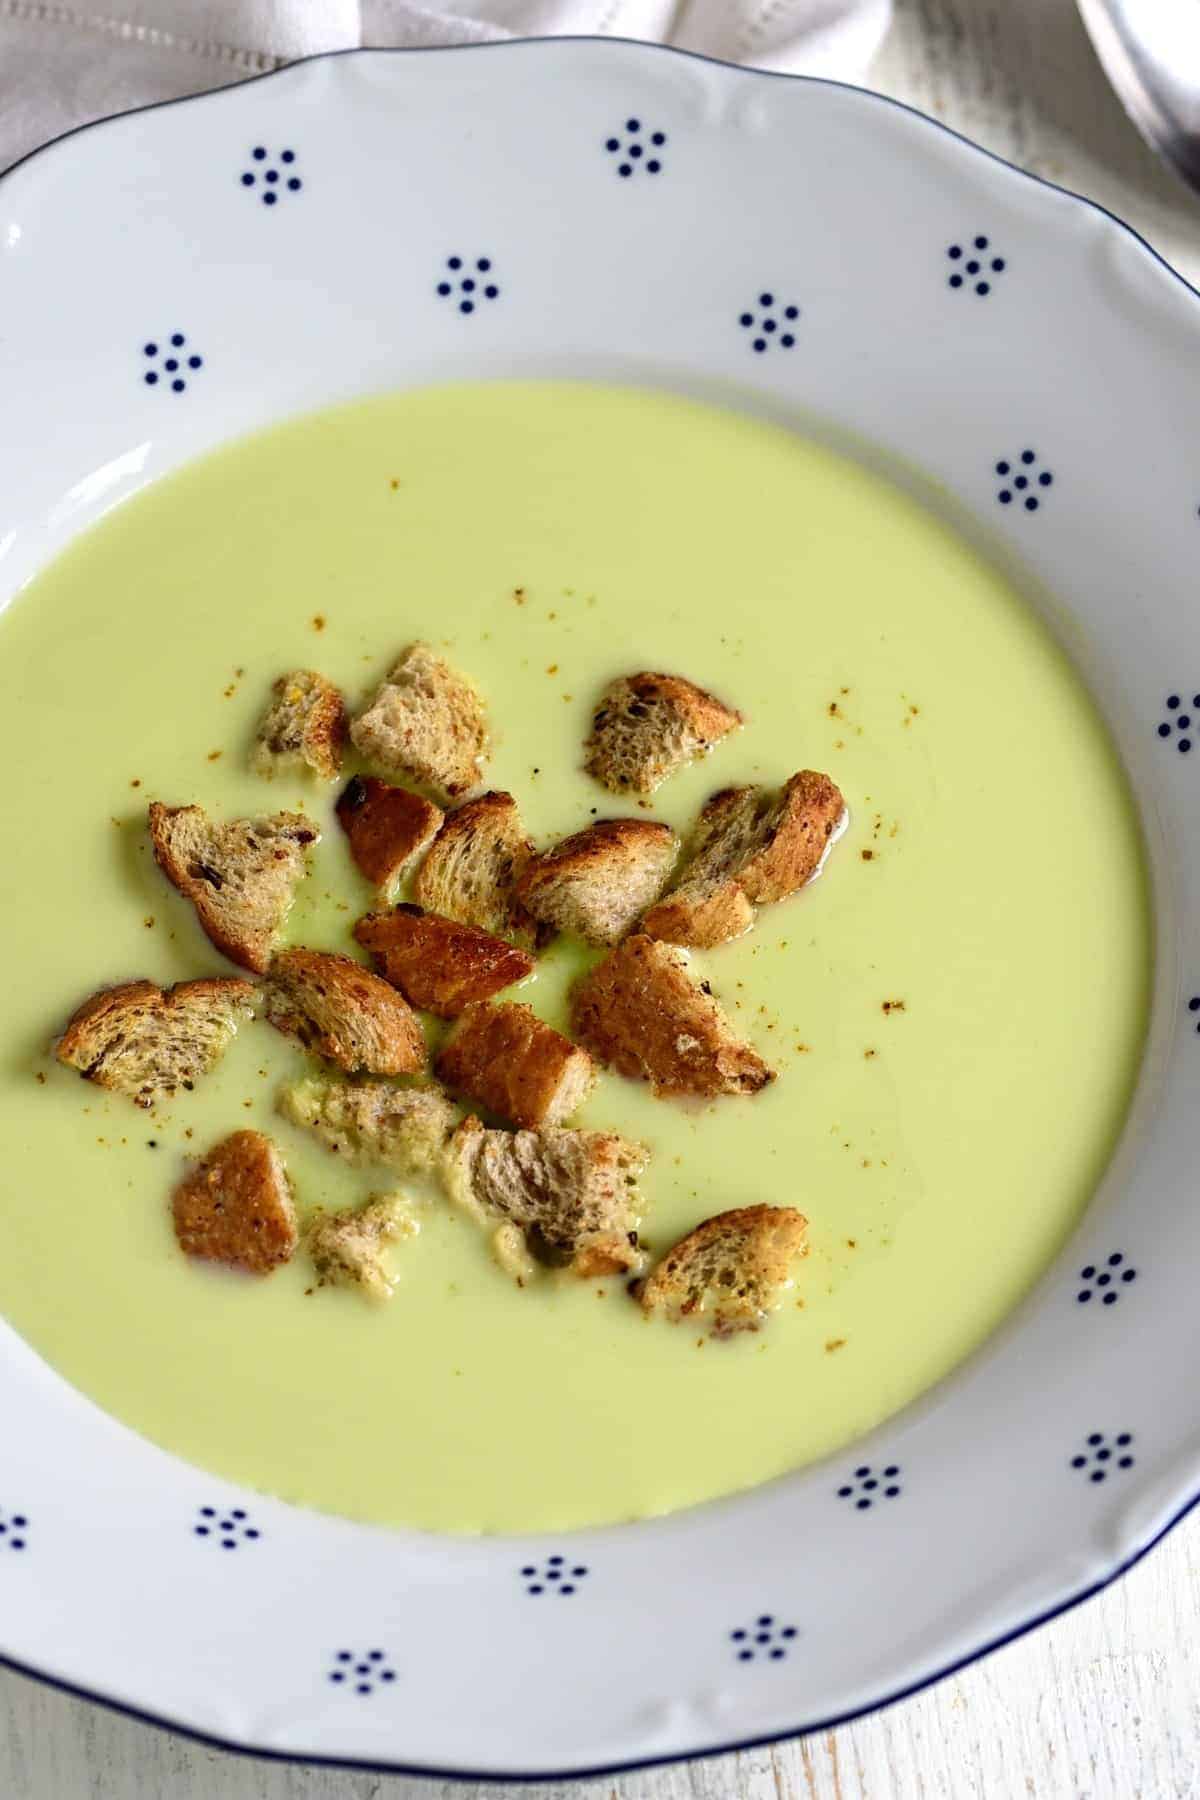 Bread croutons in pea soup.